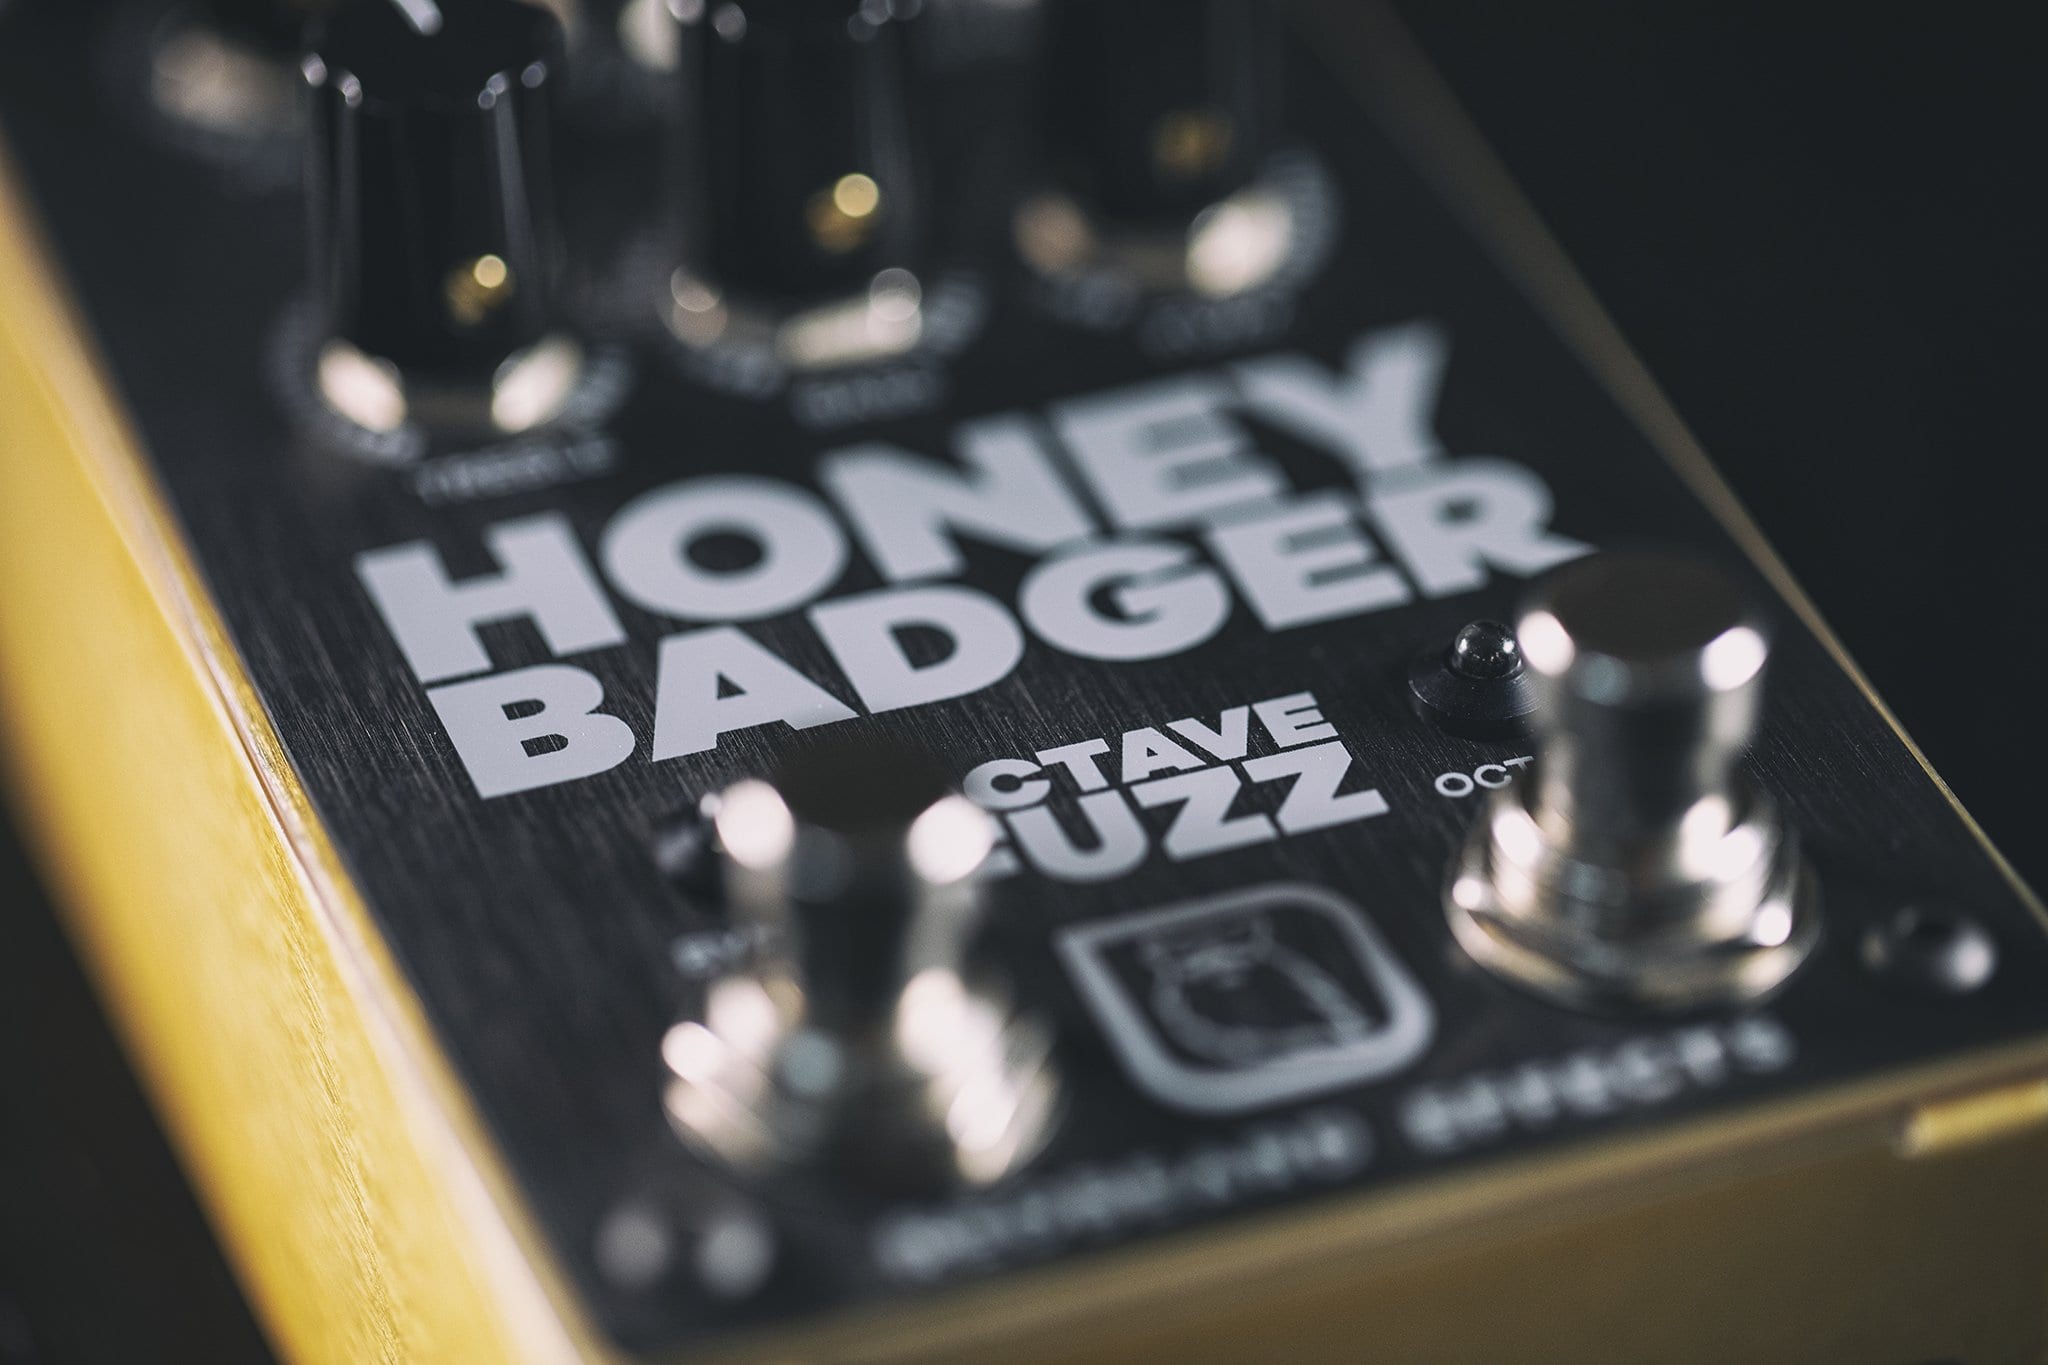  RedBeard Effects Honey Badger Octave Fuzz with footswitchable octave setting